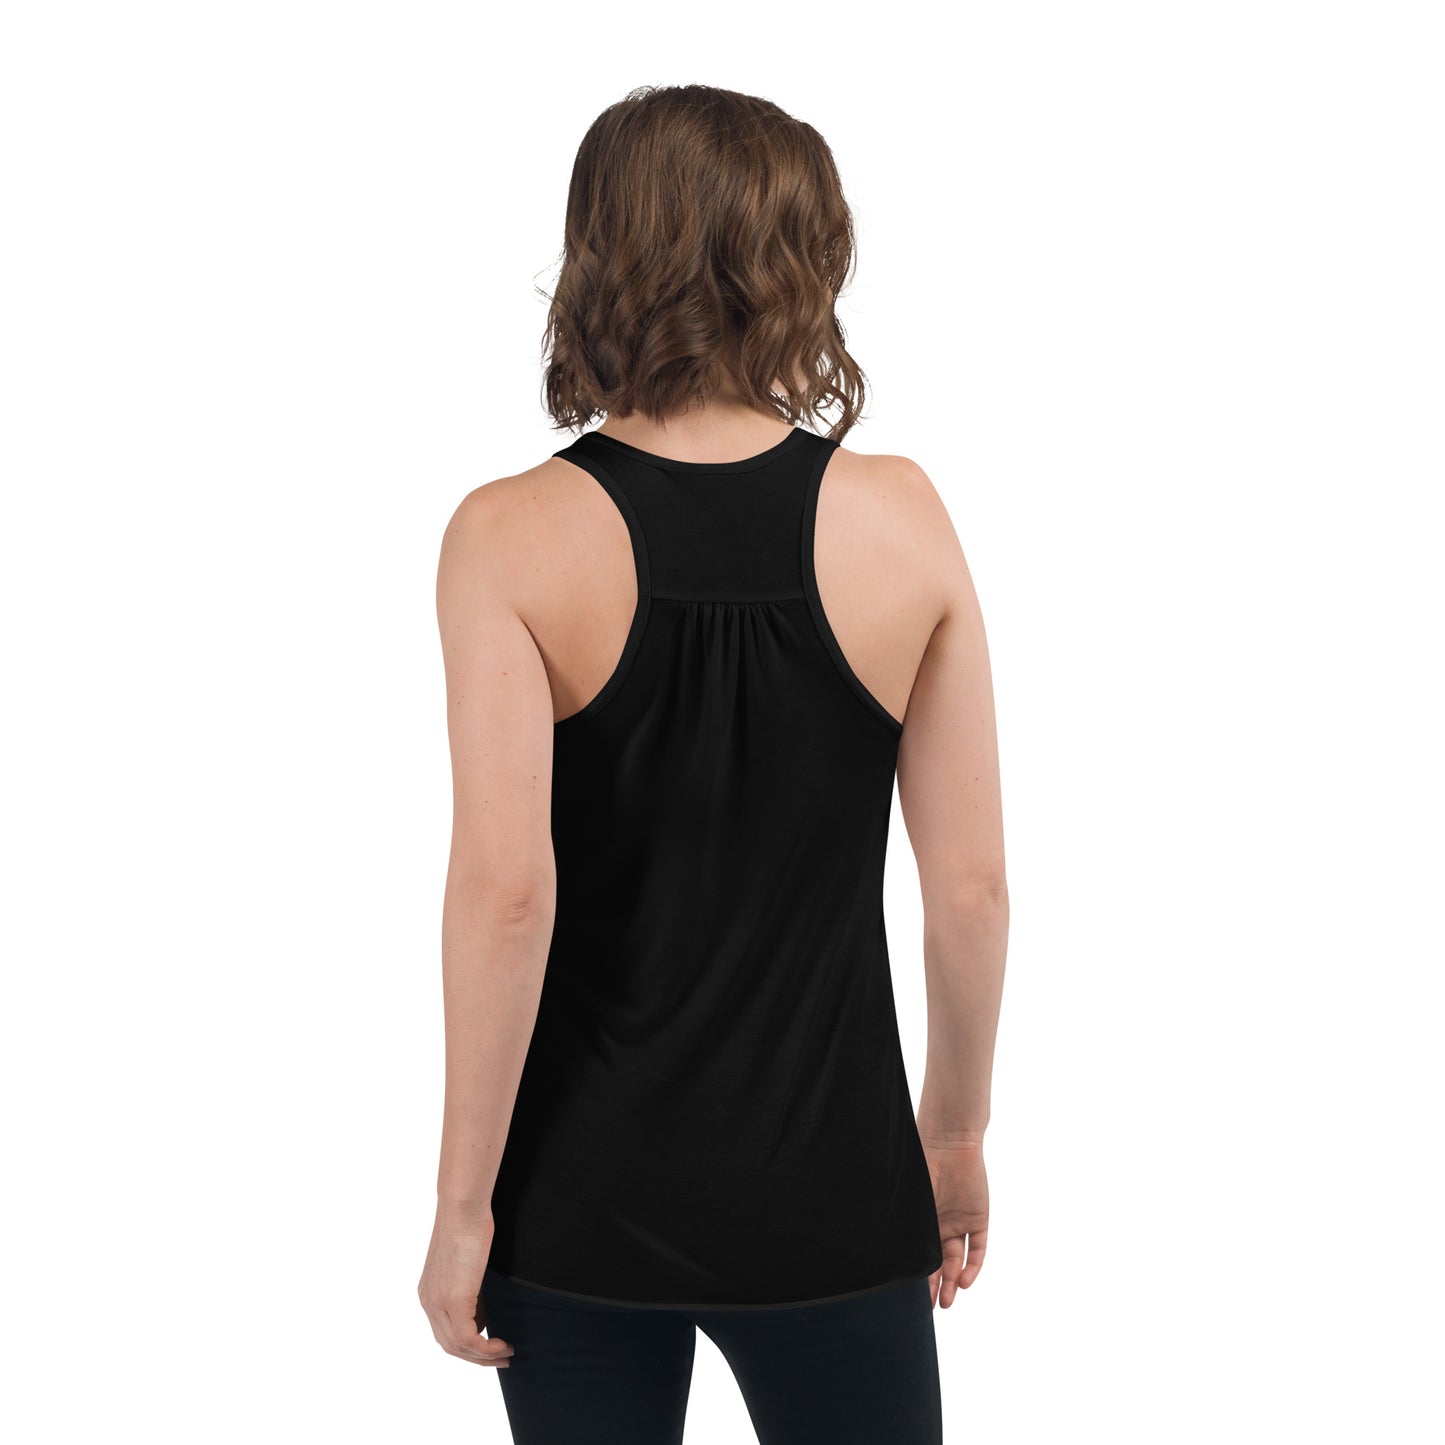 Women's Flowy Racerback Tank "SOLACE STABLES" in Classic White on Basic Black